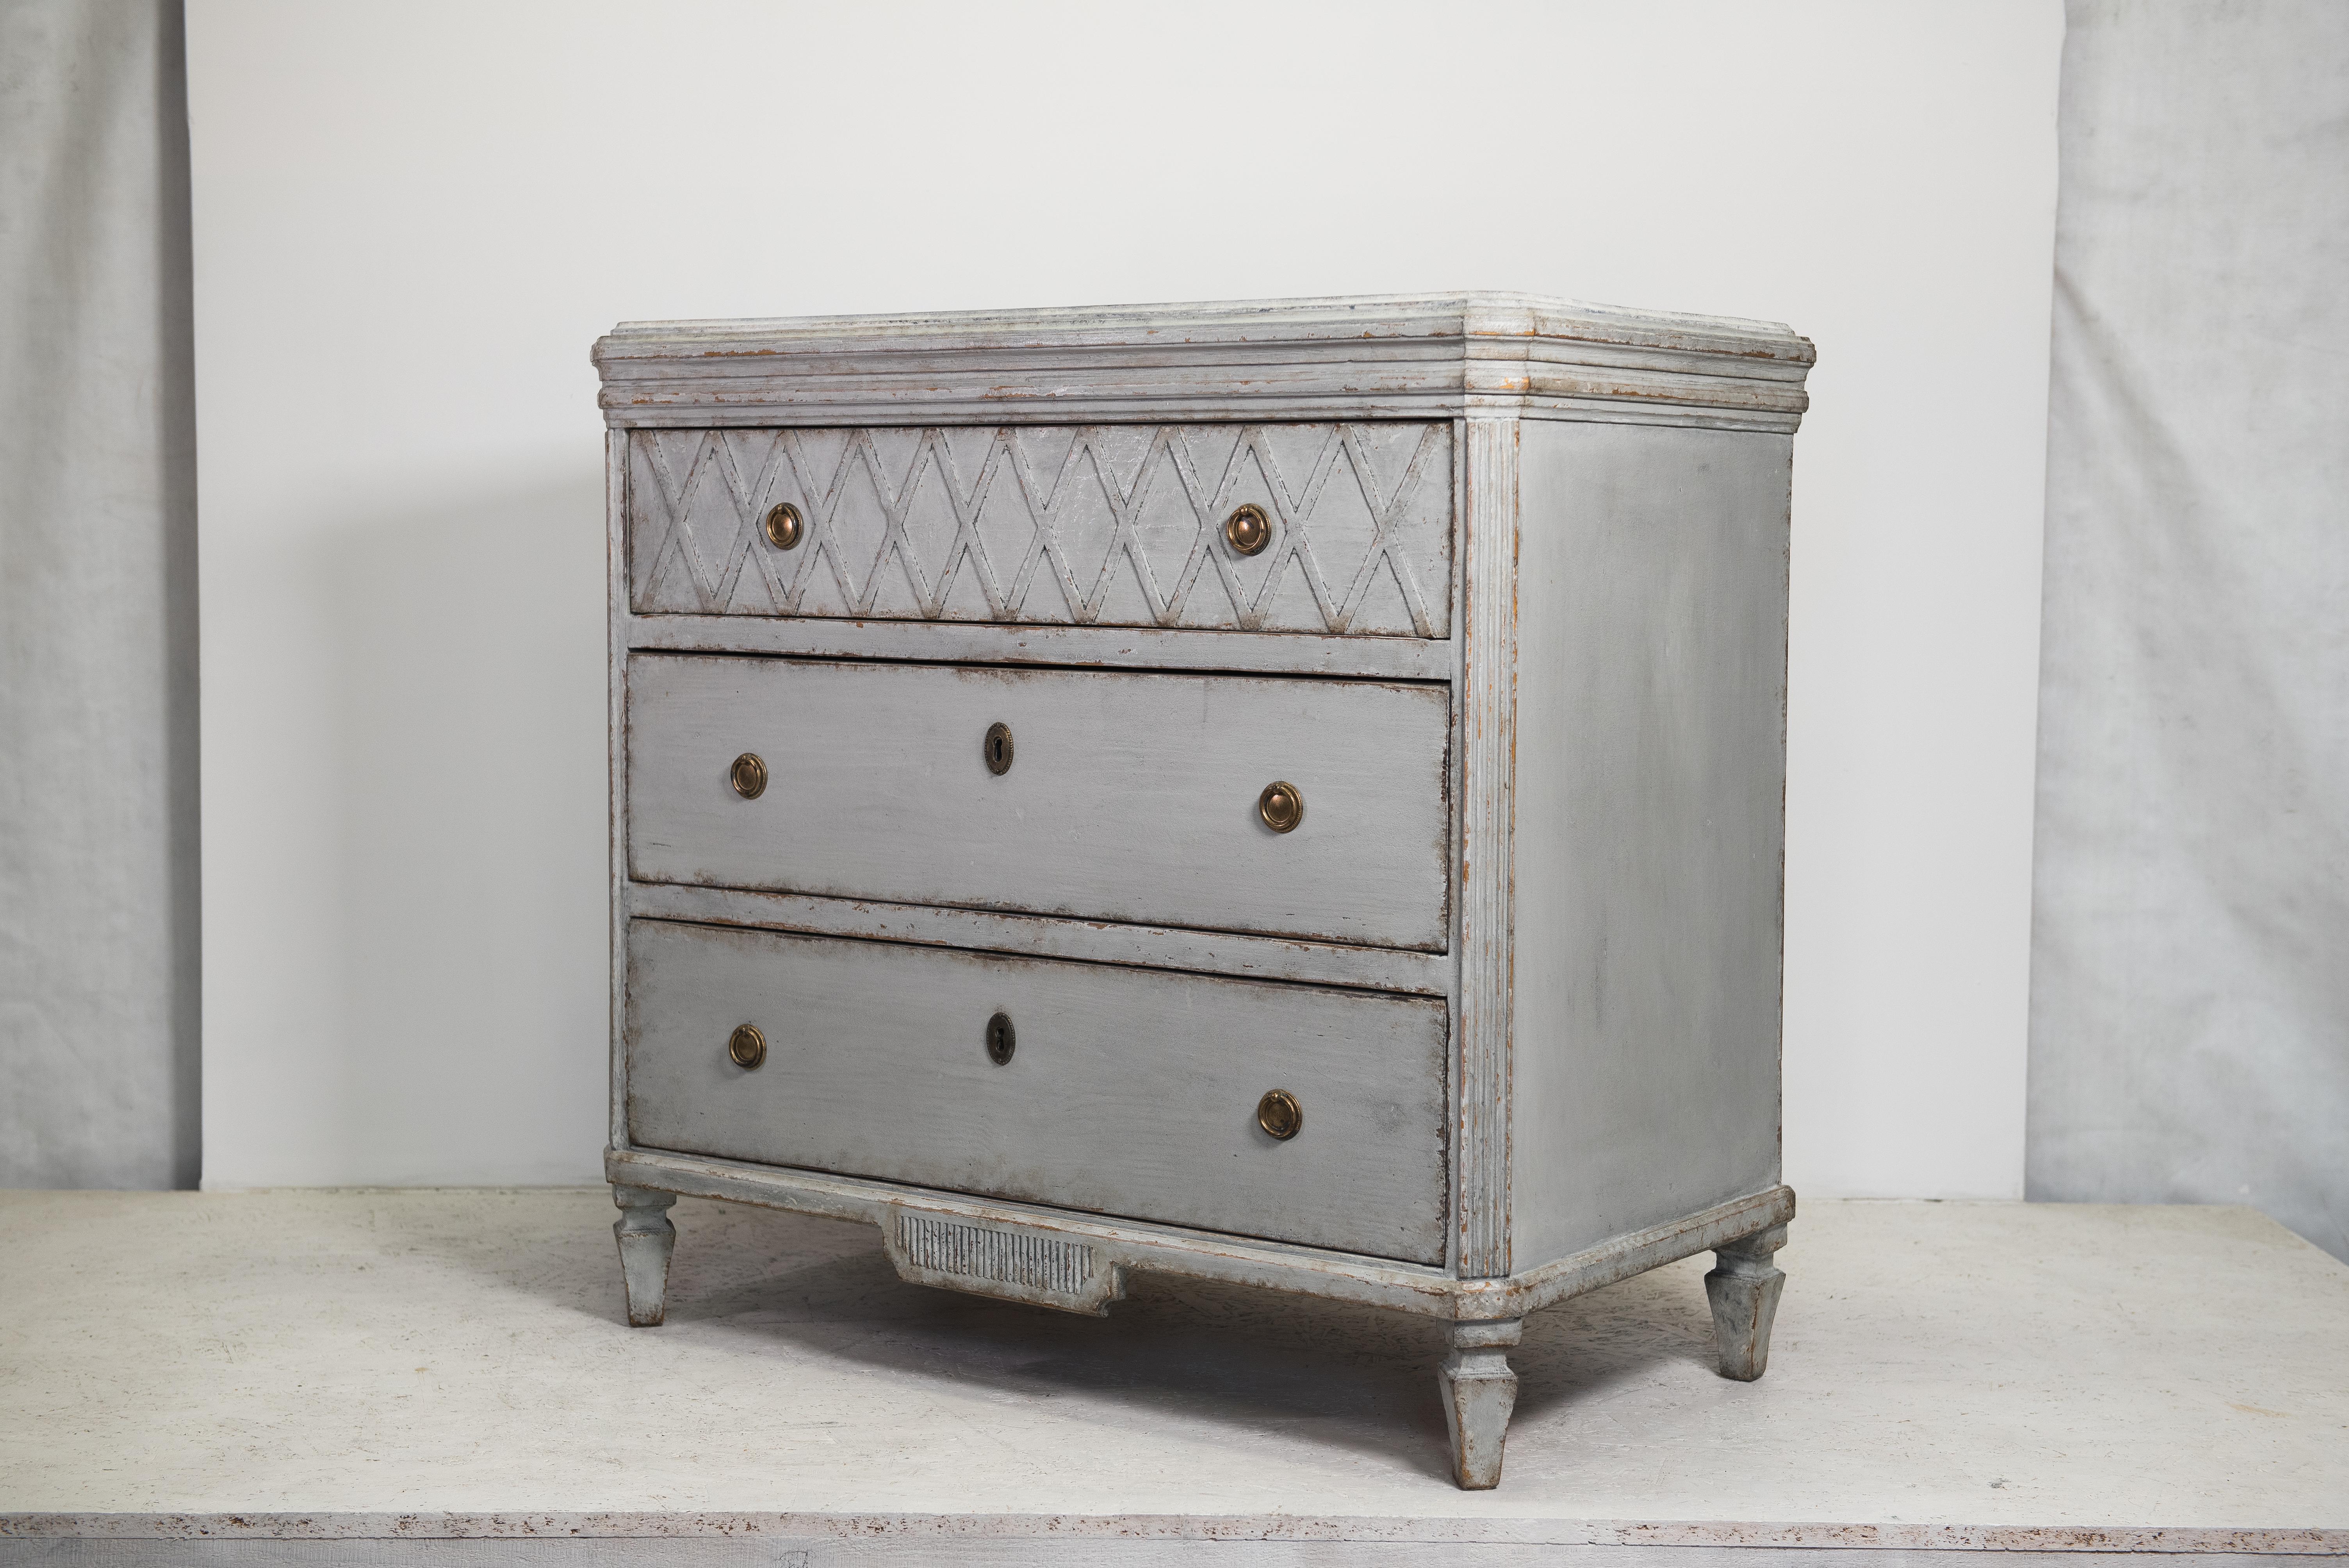 C 1845 antique Swedish Gustavian painted chest of 3 drawers commode with detailed decorative motifs on the top rail, front and brass detailing.

It has 3 drawers with brass ring pulls and a carved plinth and feet with column detail on the front